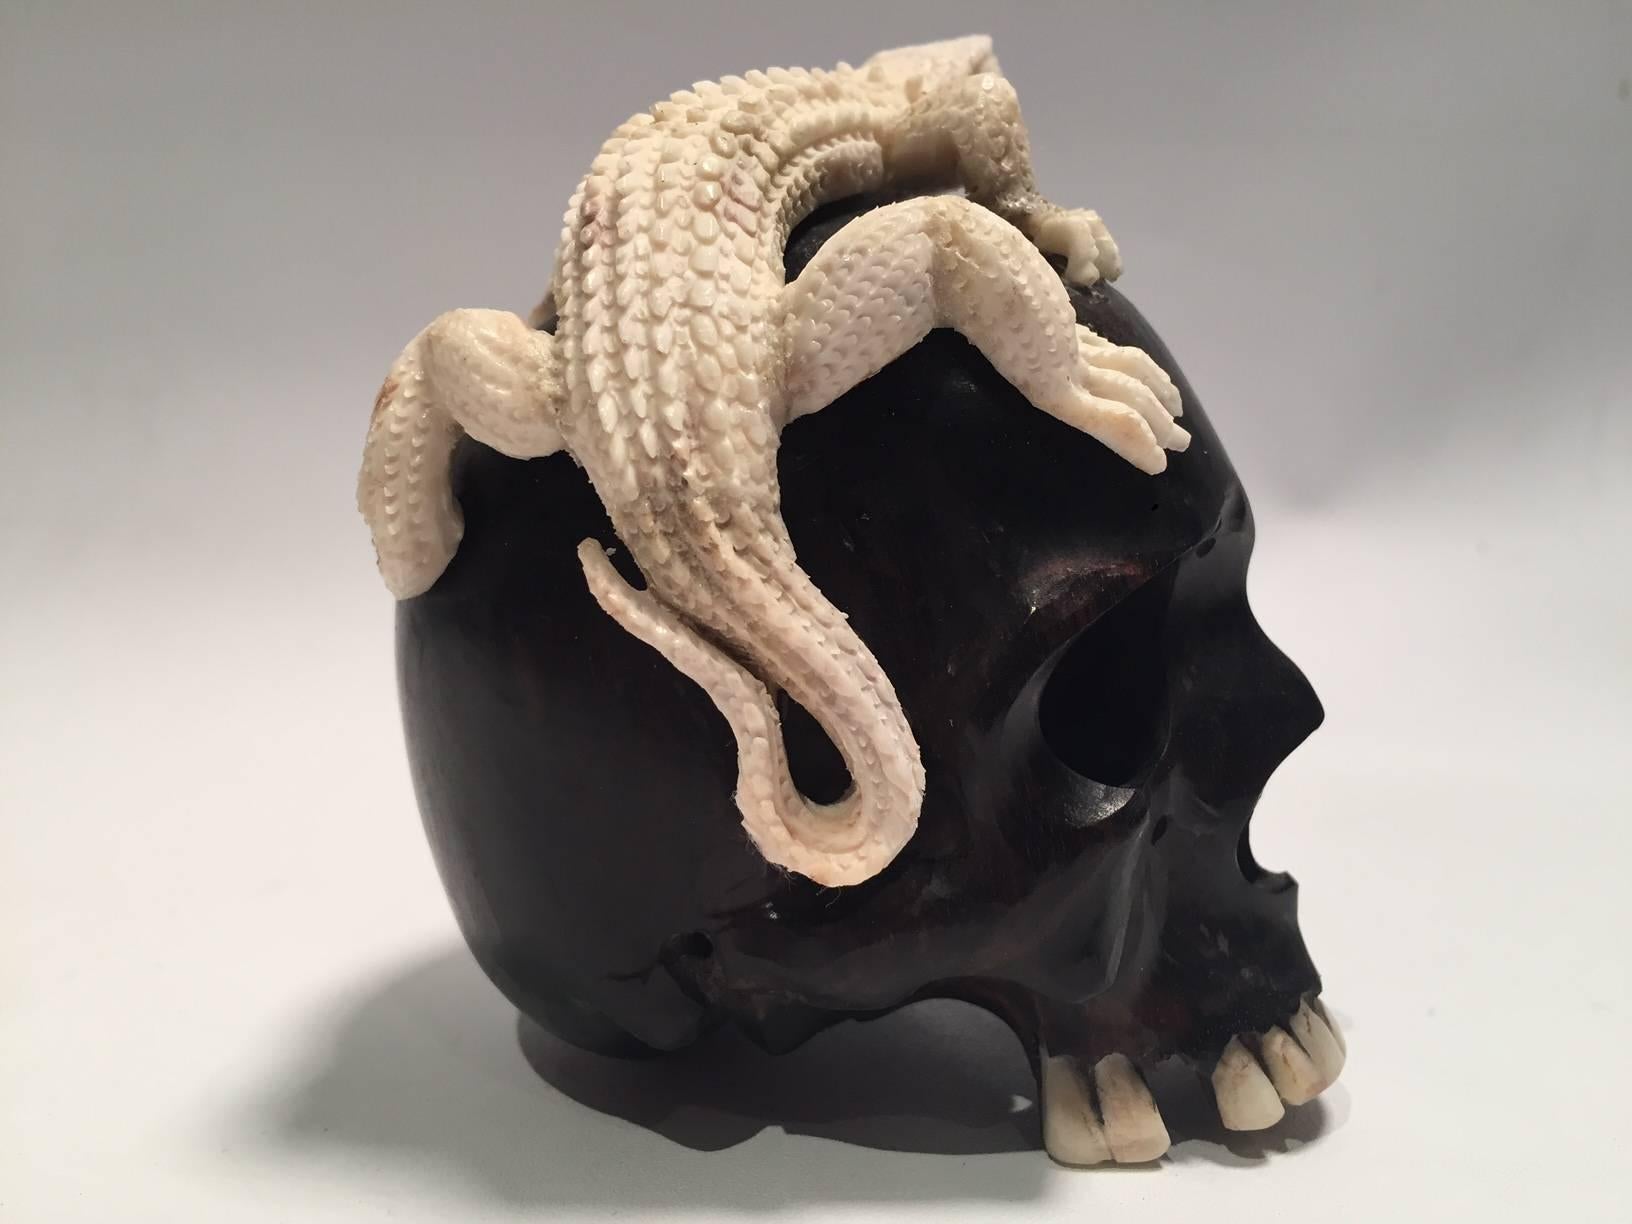 Beautifully sculpted wood skull with a carved moose antler bearded dragon. Meticulously created by skilled Indonesian artist this is a one of a kind piece made exclusively for Creel and Gow.